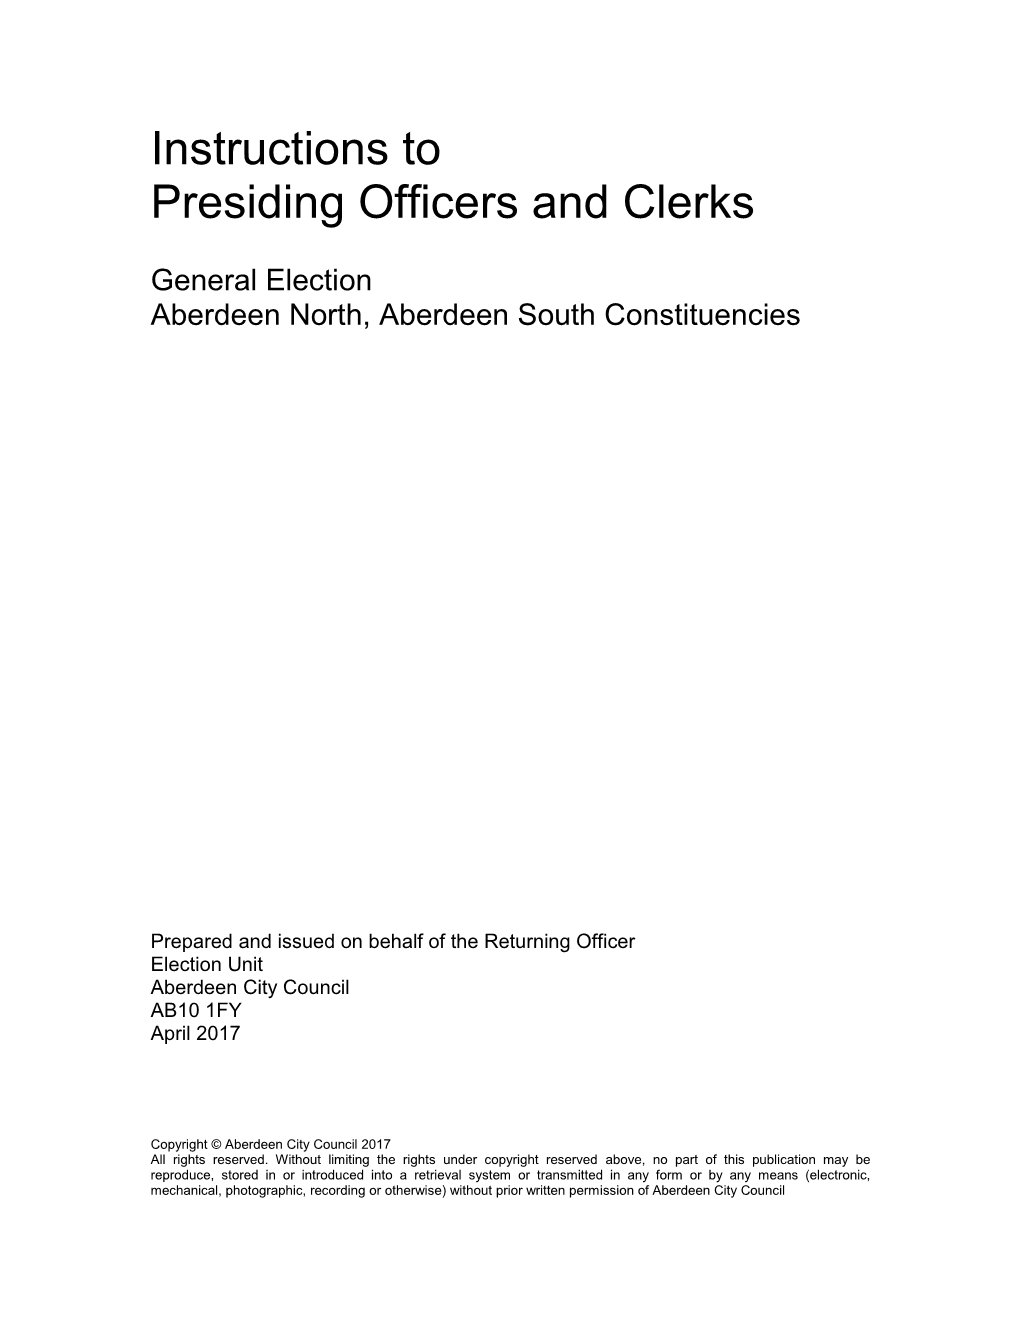 Instructions to Presiding Officers and Clerks